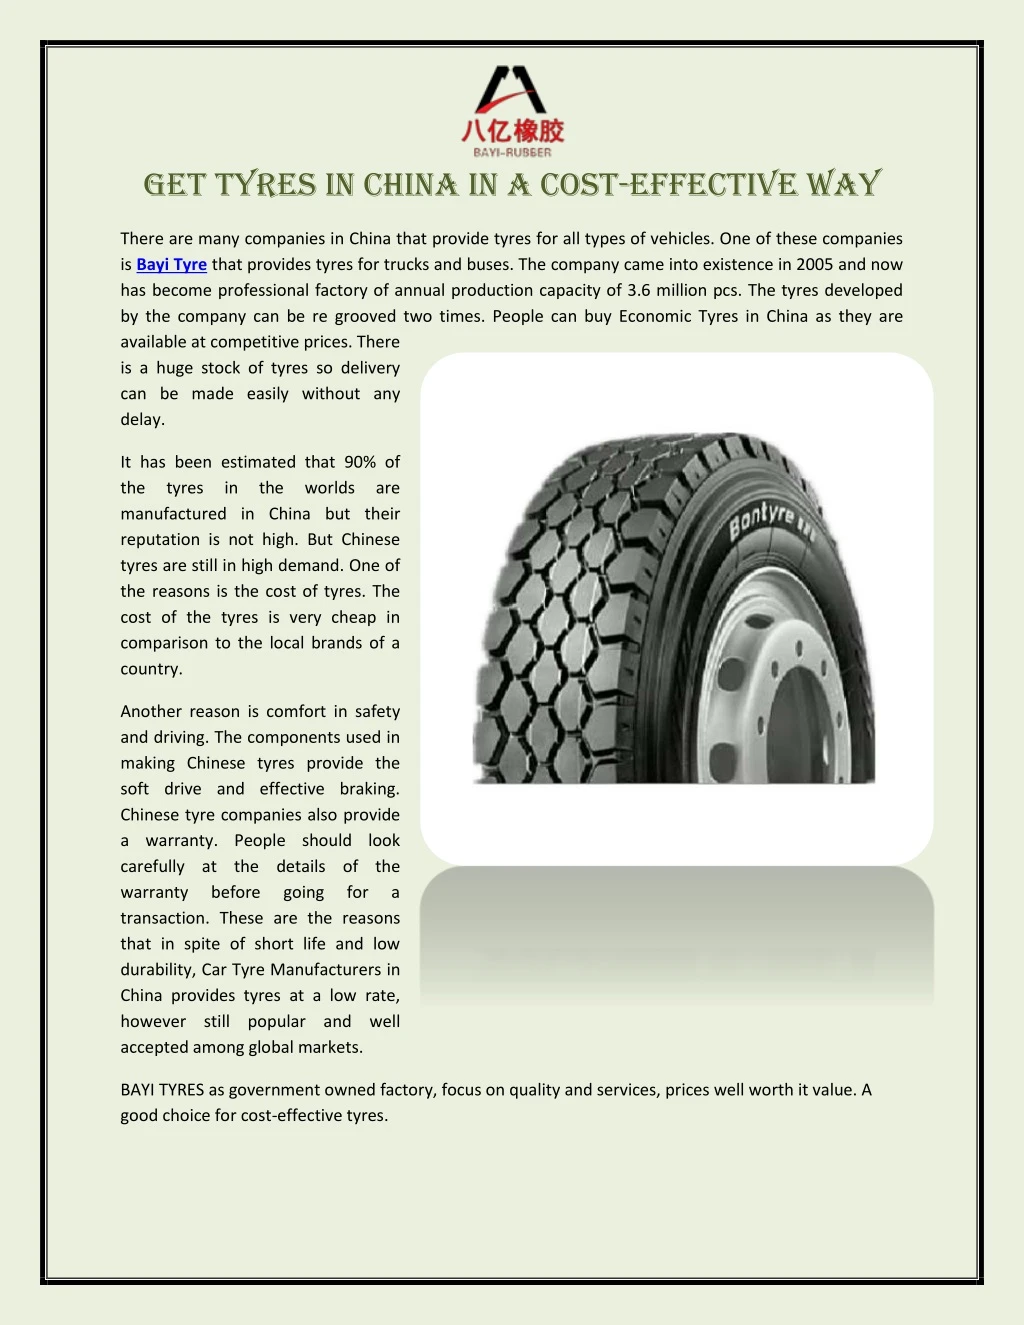 get tyres in china in a cost effective way